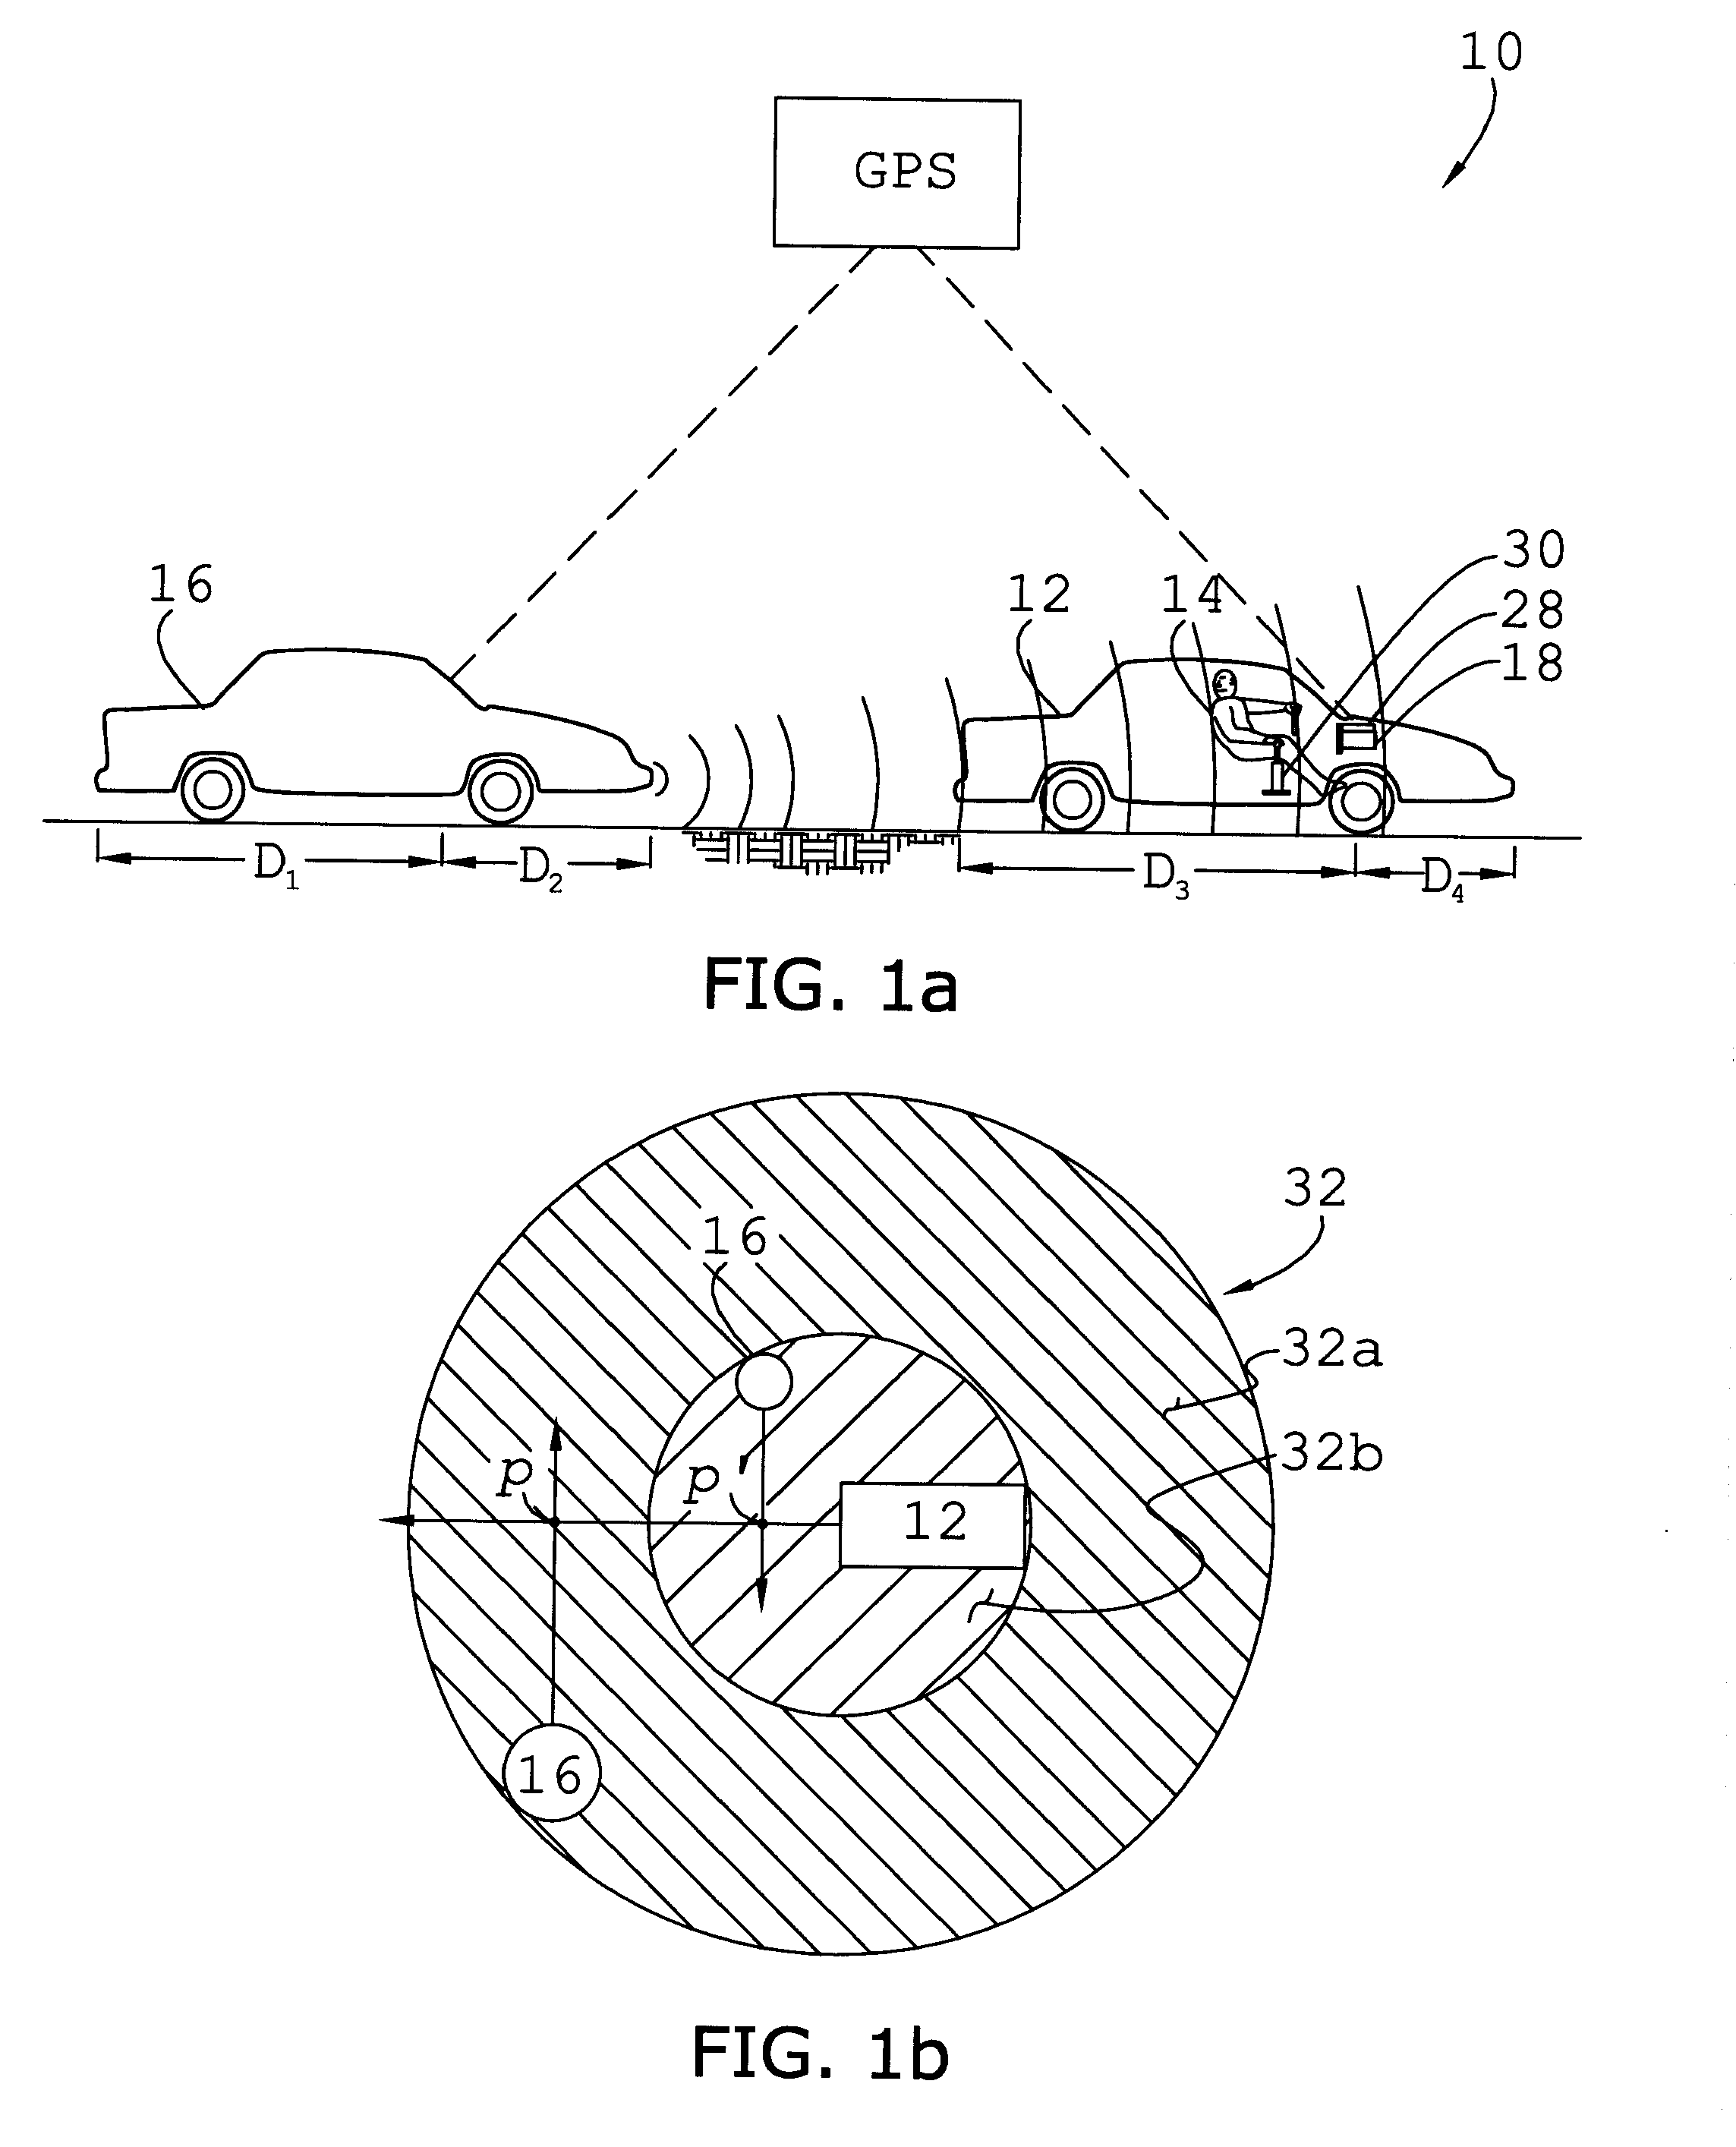 Collision avoidance system and method of aiding rearward vehicular motion